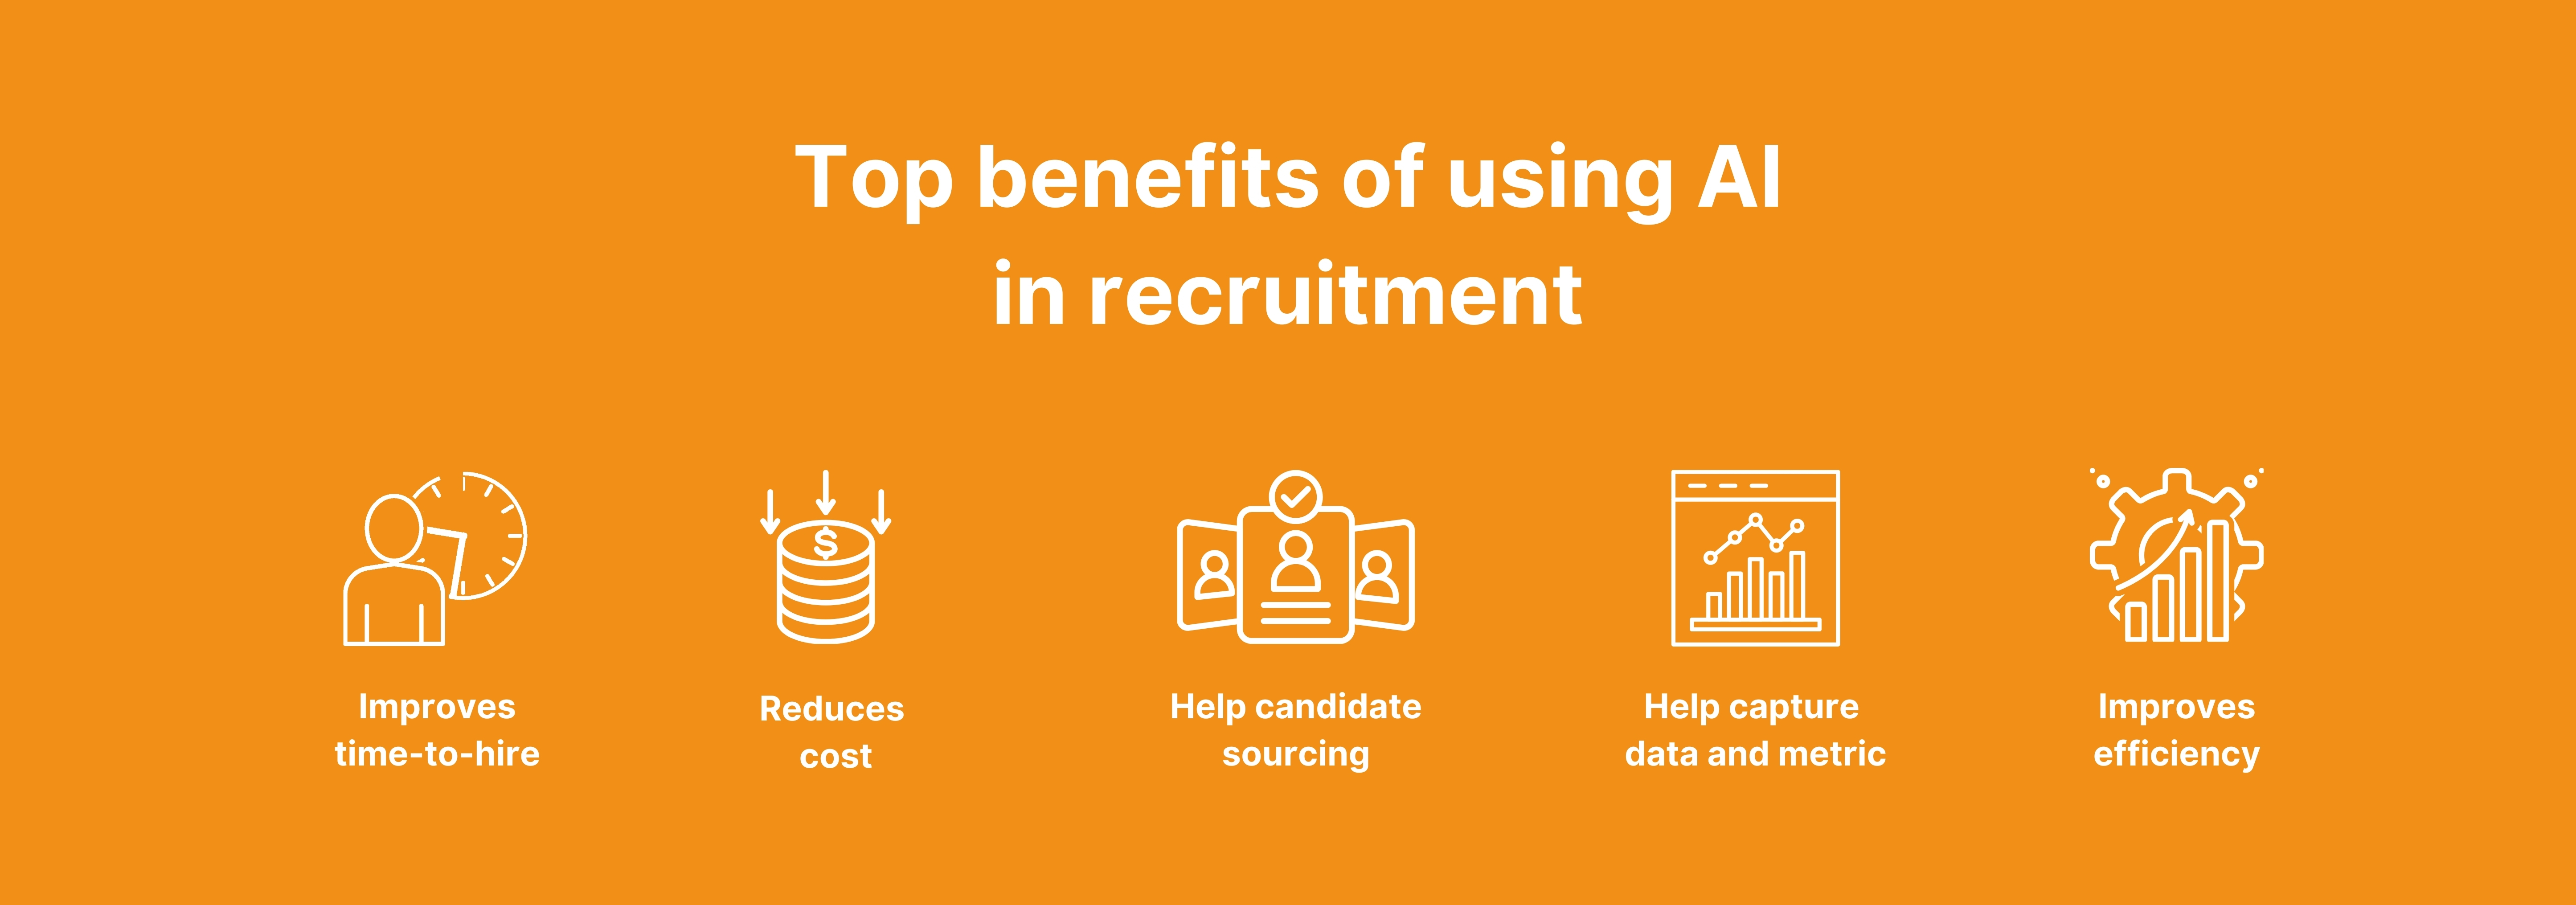 Vs
BE

Improves
time-to-hire

Top benefits of using Al
In recruitment

EN 9 ve So
: Ar ’

SIC fl

Reduces Help candidate Help capture Improves

(e013 sourcing data and metric efficiency